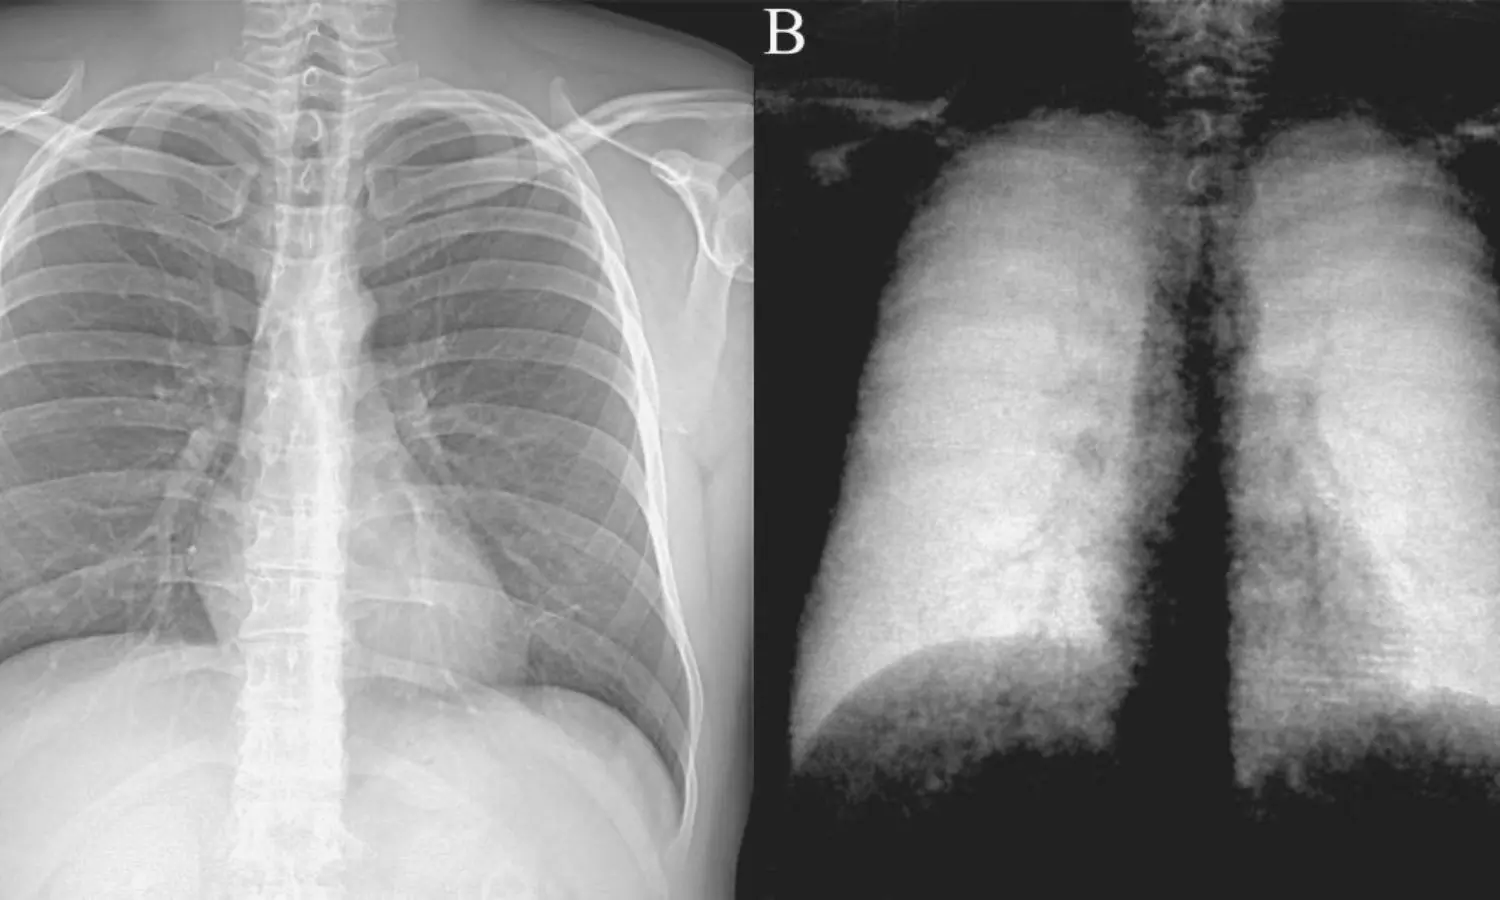 Dark-field chest X-ray helpful for differentiating emphysema from fibrosis: Study